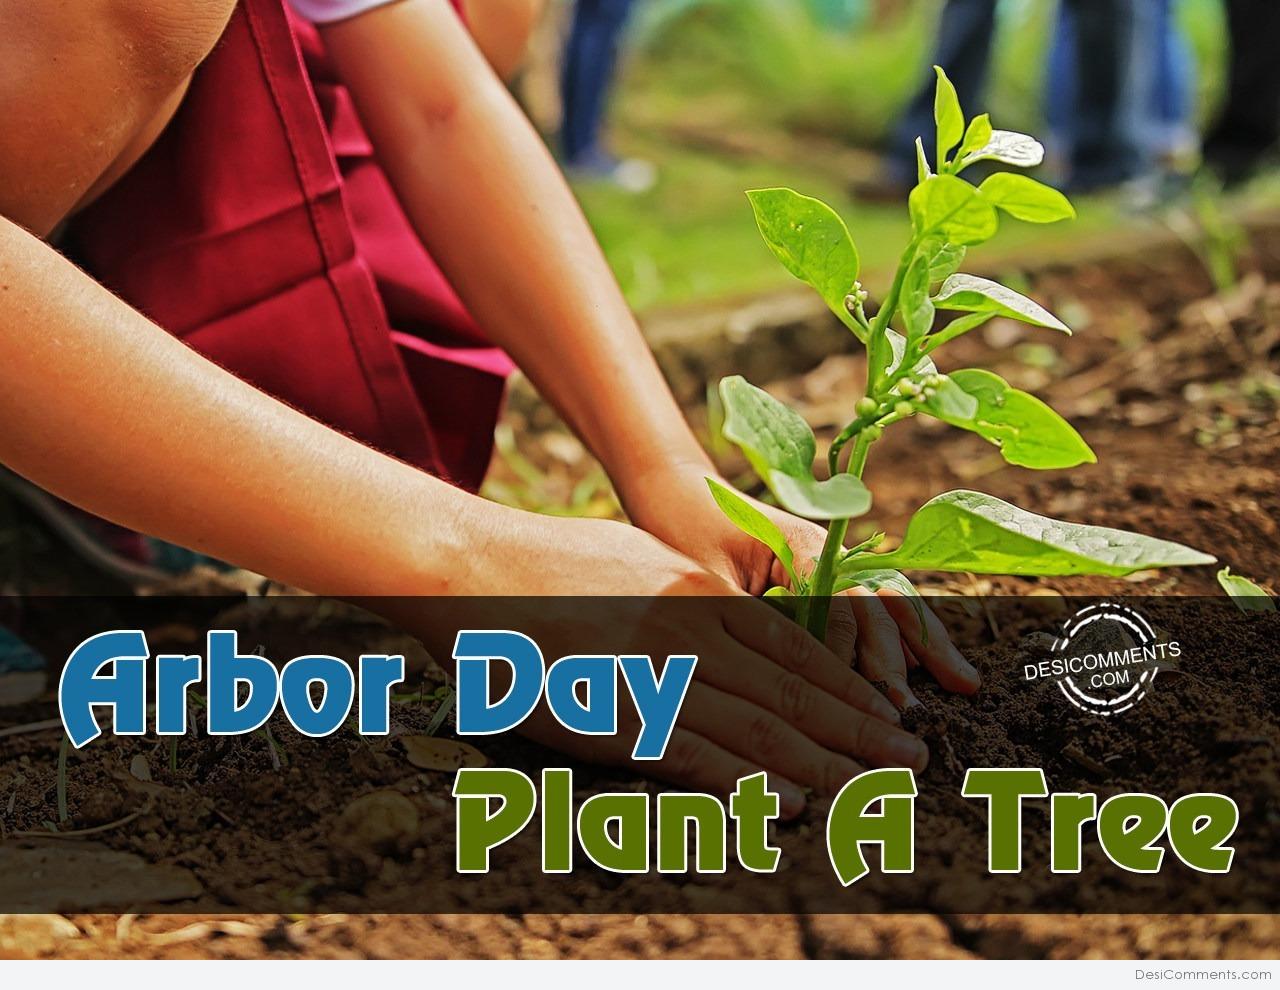 Arbor Day Plant A Tree - DesiComments.com